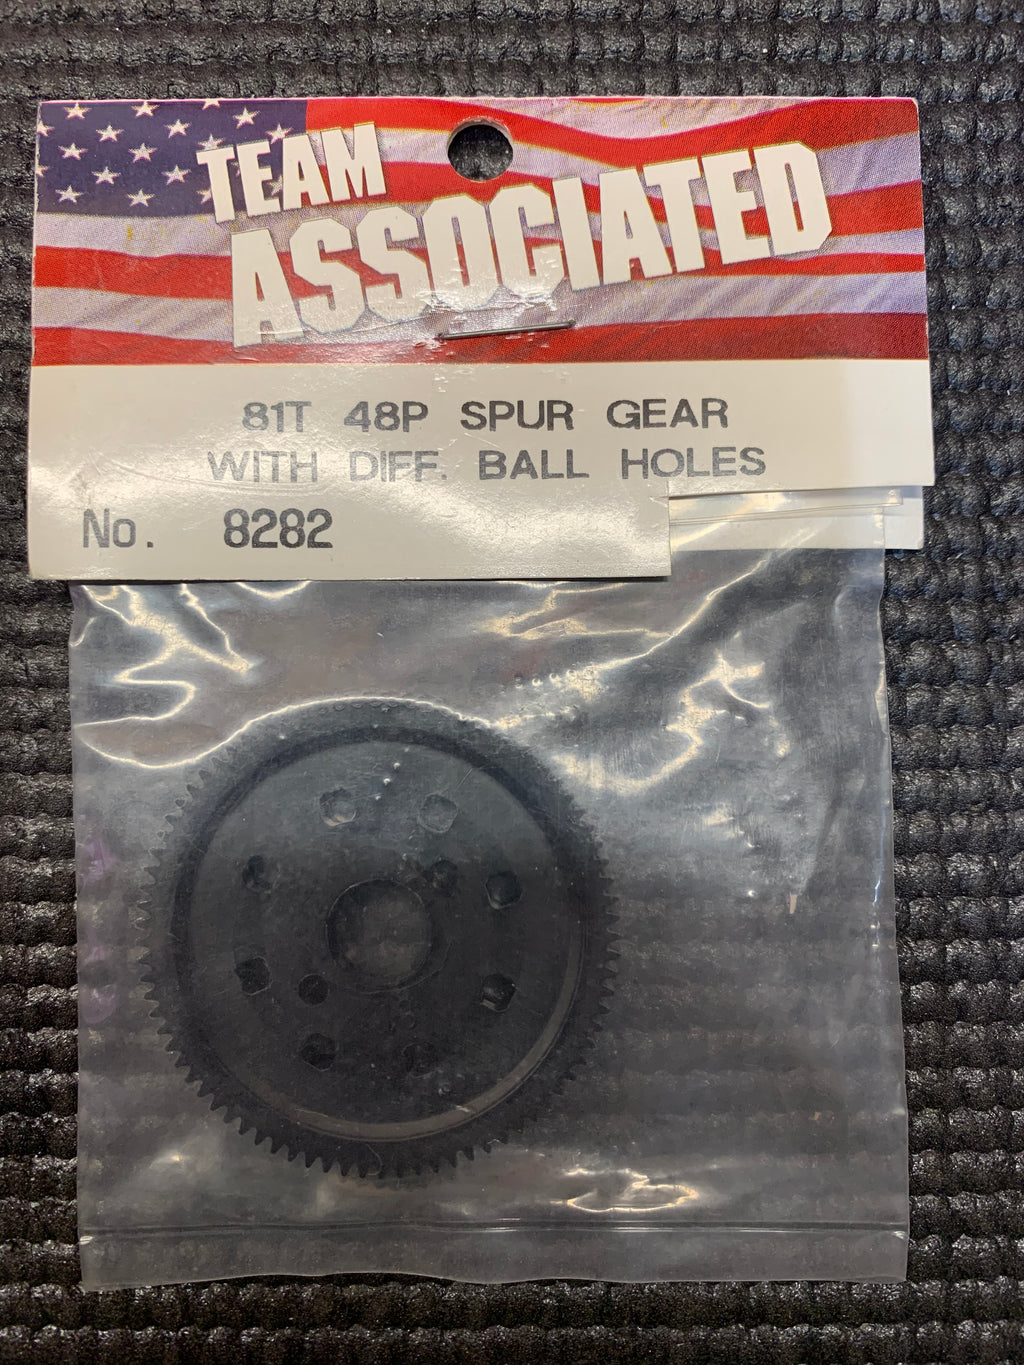 TEAM ASSOCIATED B2 81T 48P SPUR GEAR WITH DIFF BALL HOLES